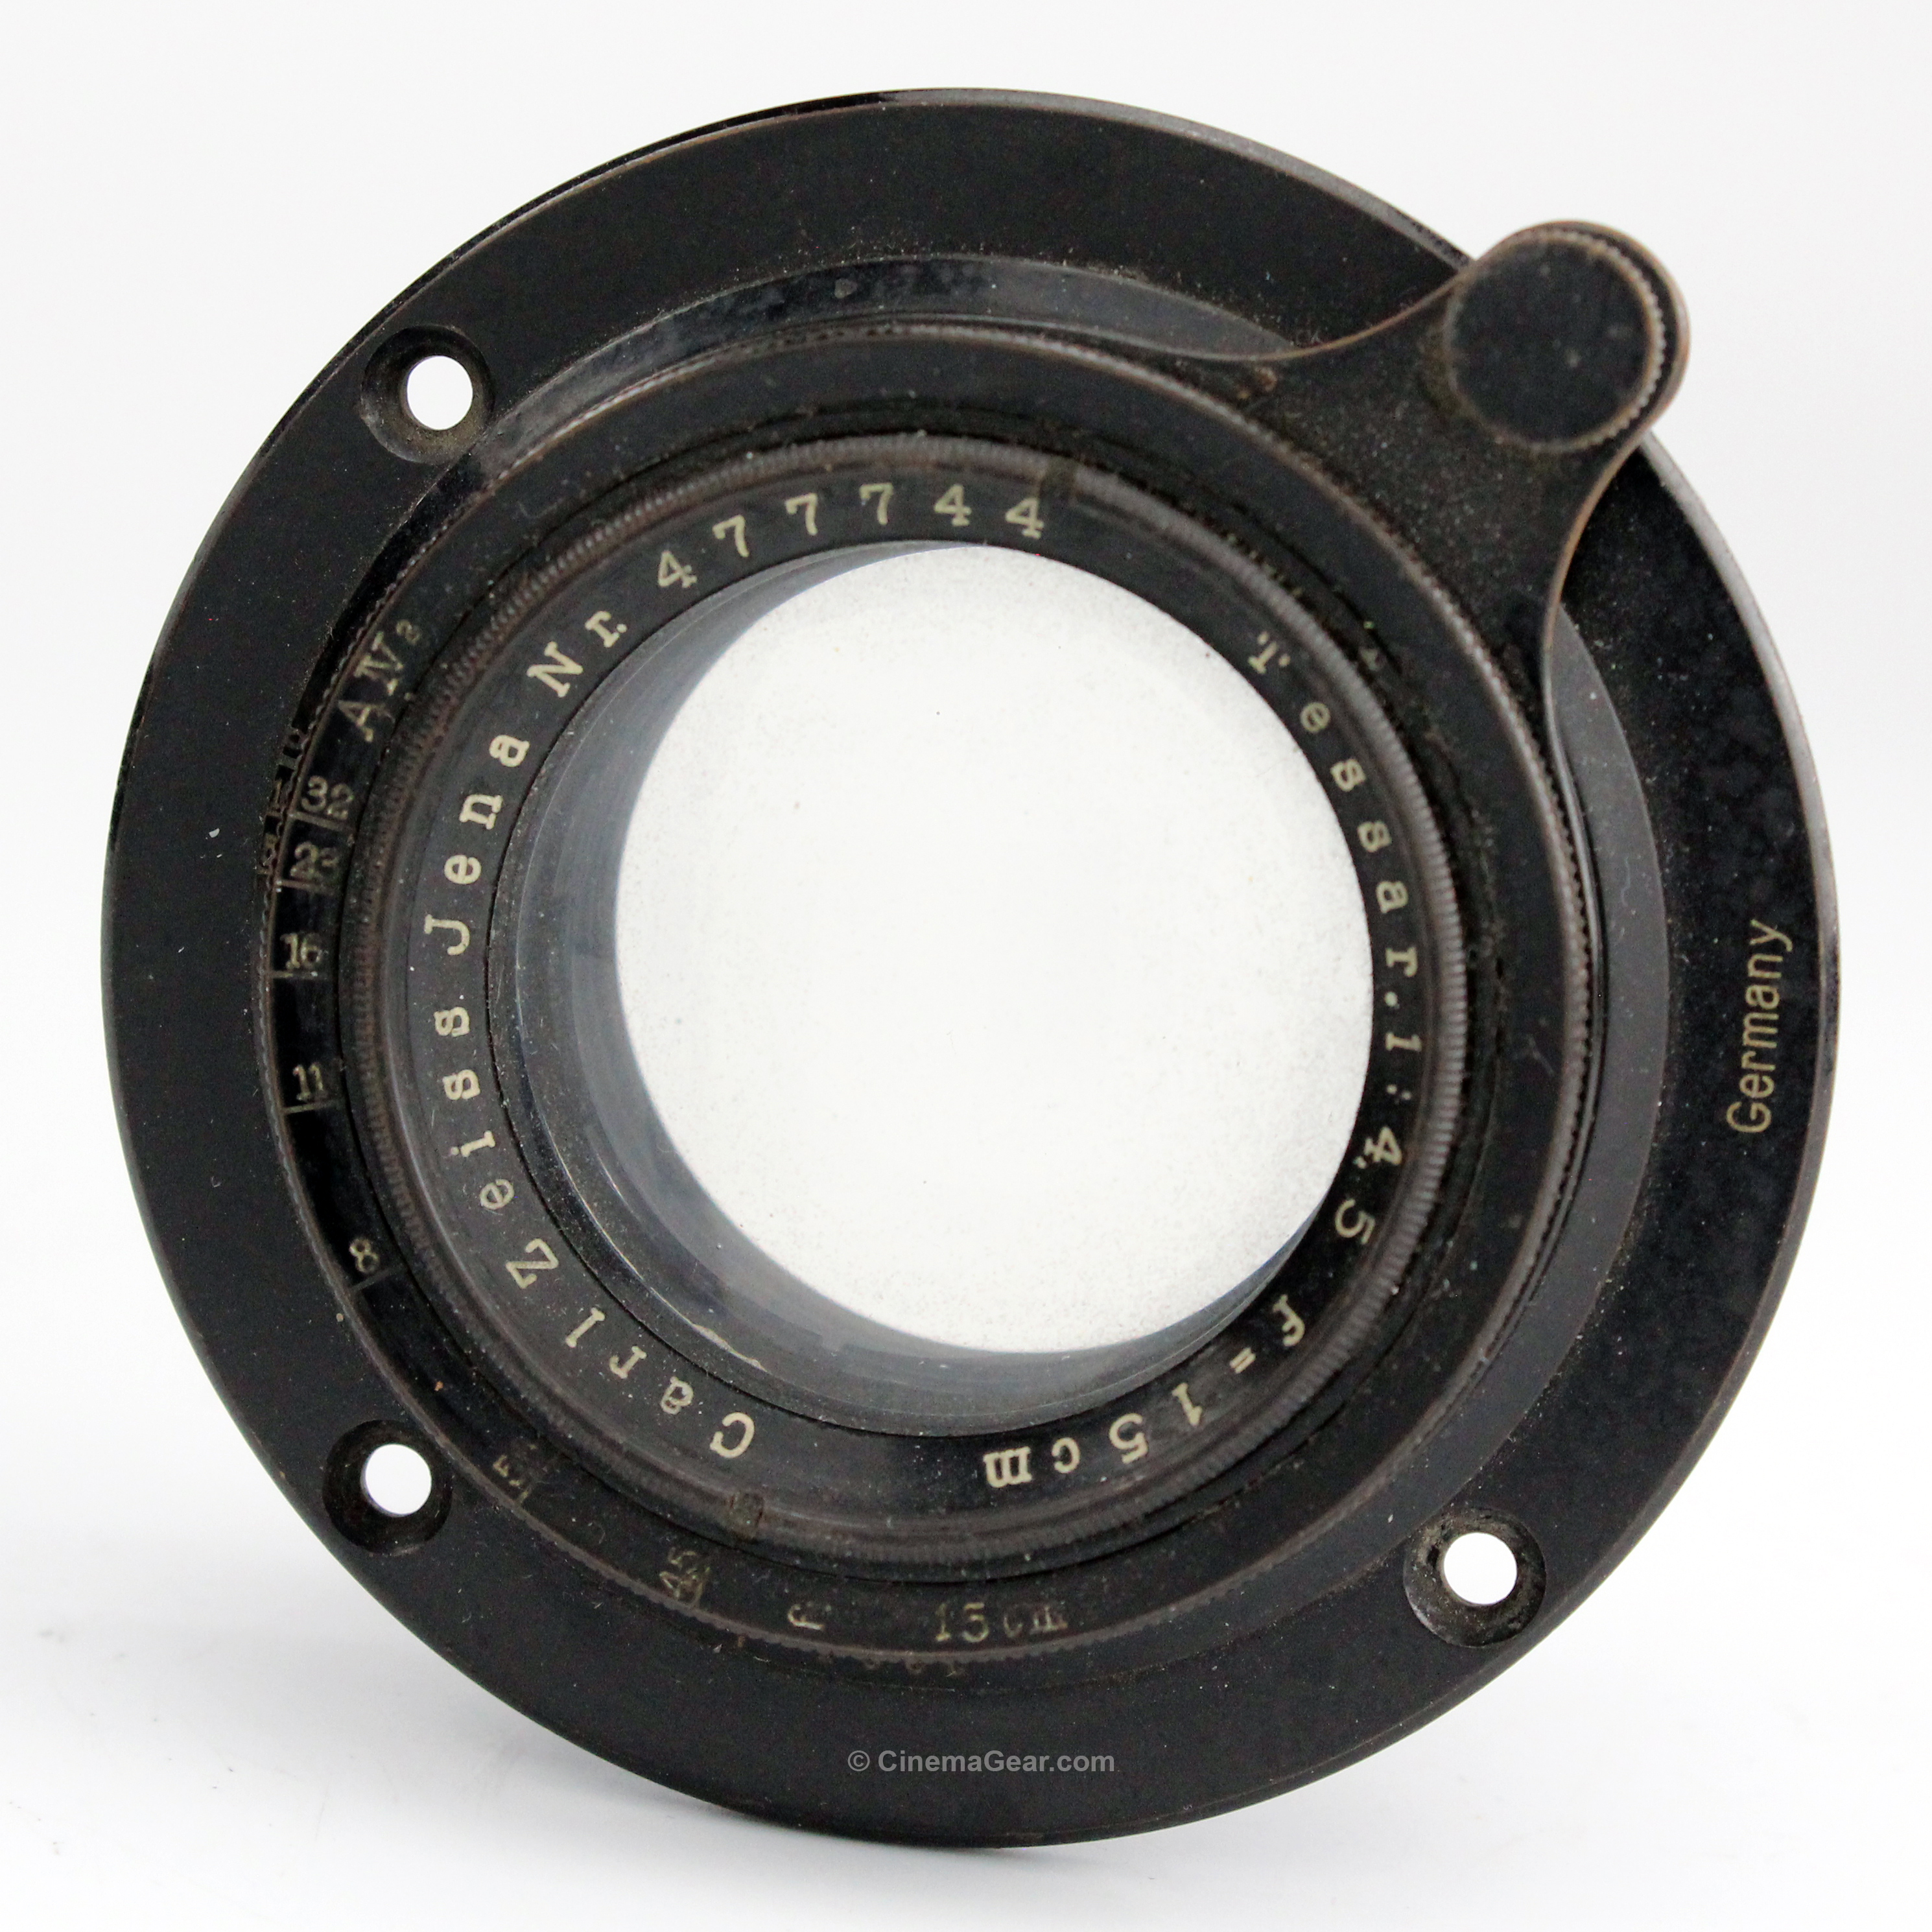 Zeiss Jena 15cm f4.5 lens with flange mount.